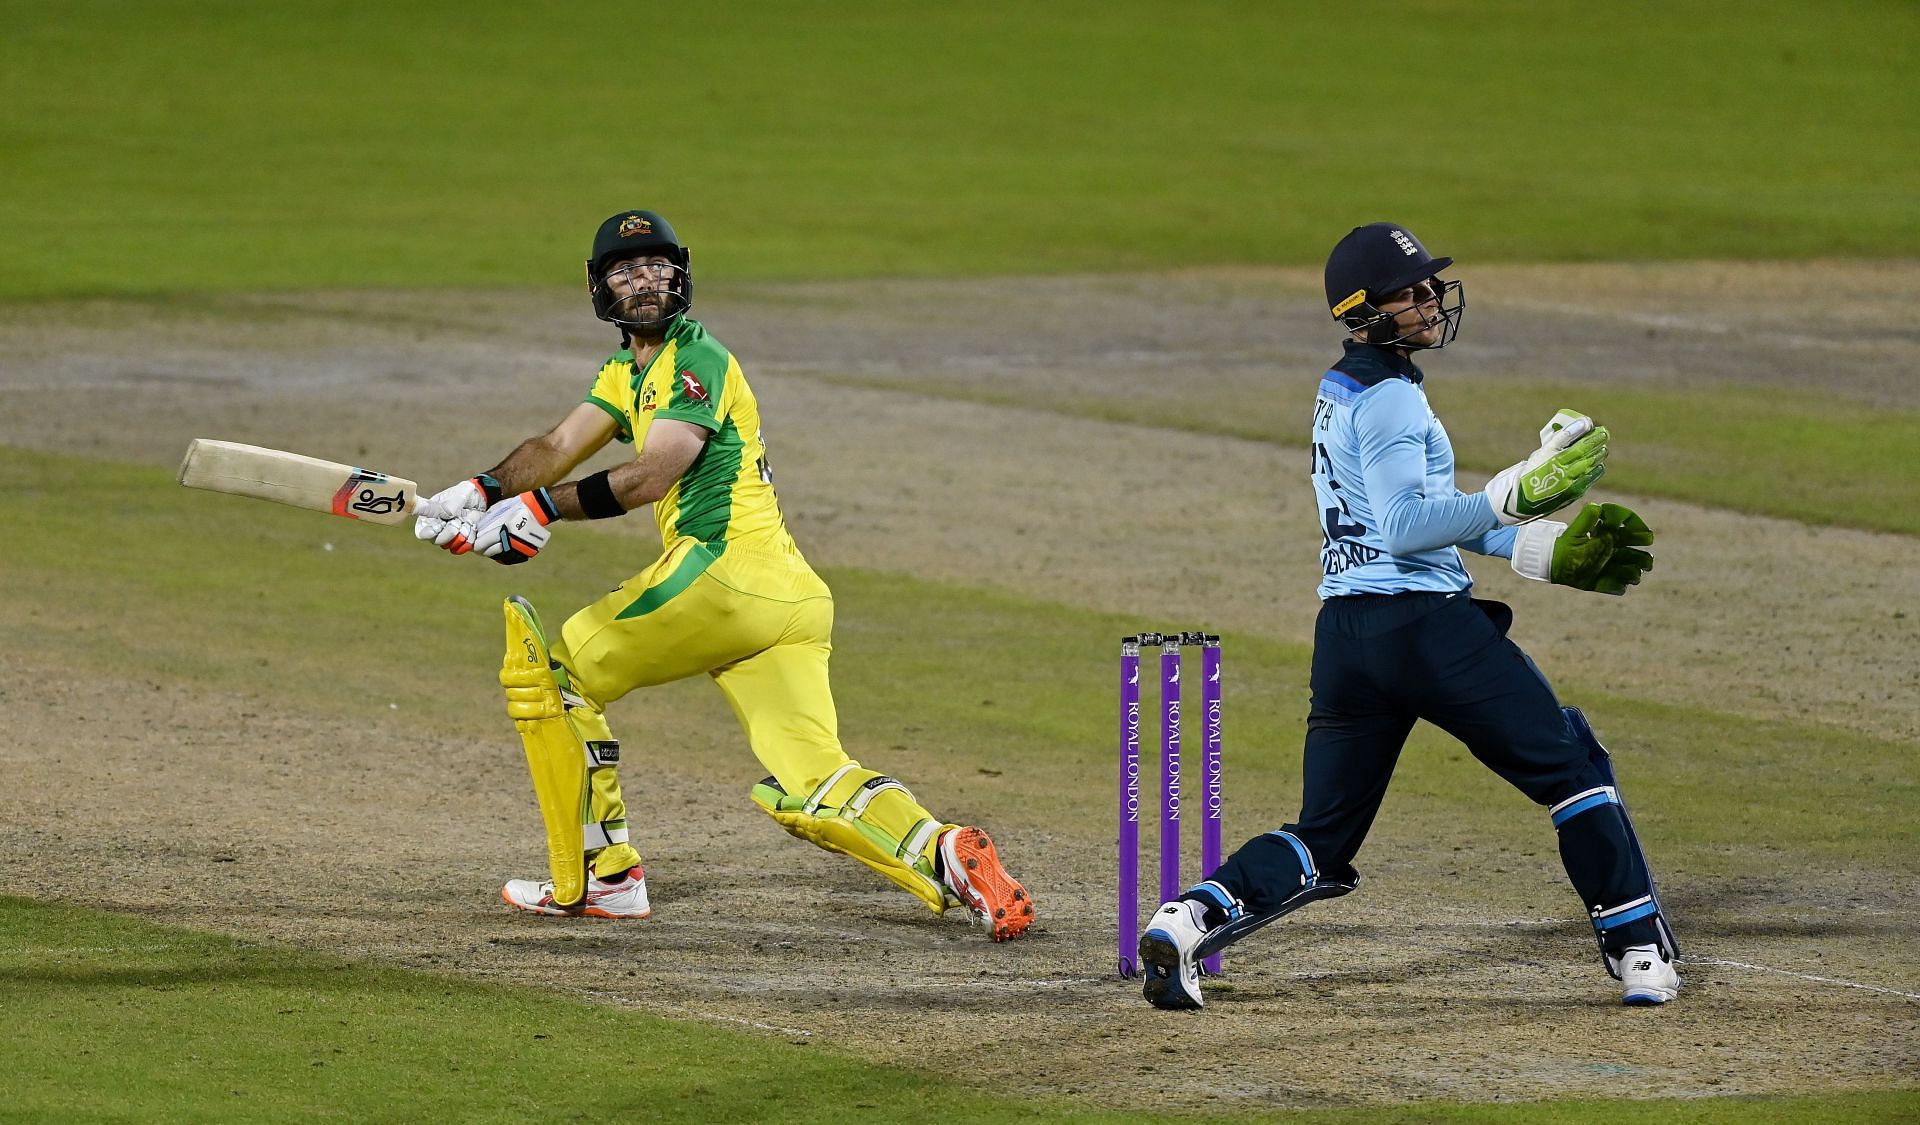 T20 World Cup 2021 Australia vs England live telecast channel in India and live streaming details